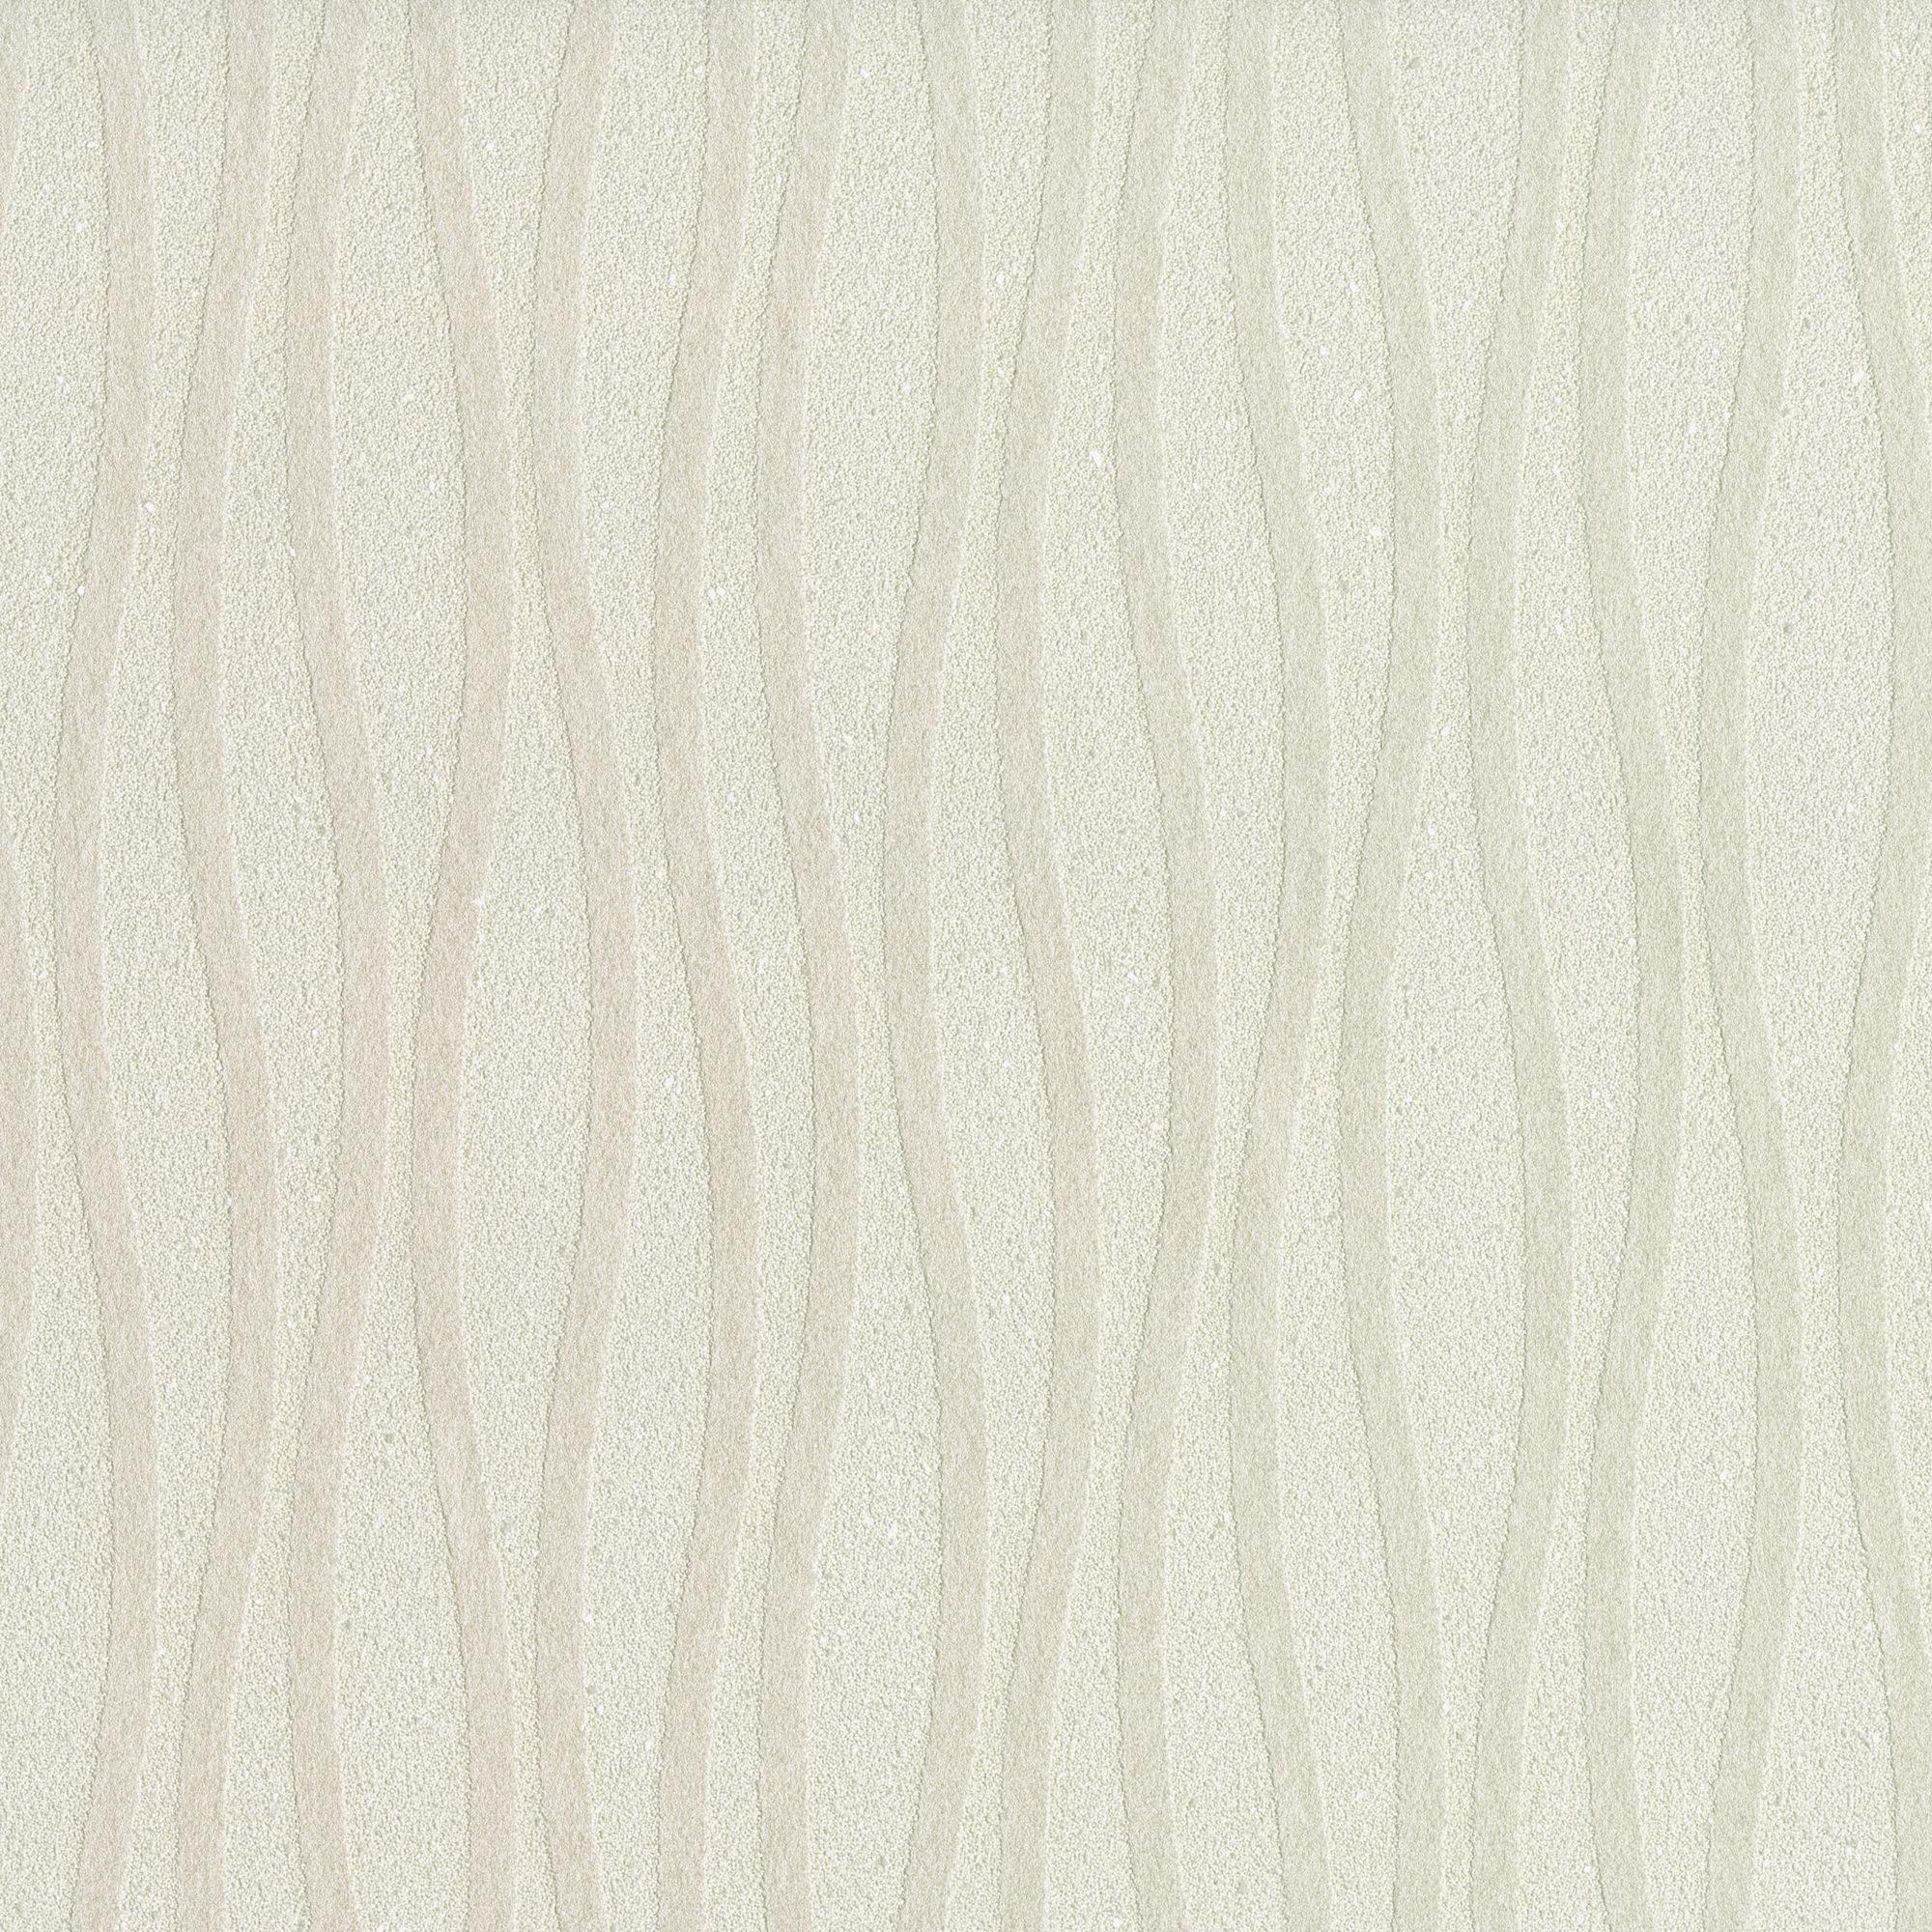 Natural waved mica wall-covering. This wall-covering is composed of all natural mica, on a non woven paper back.

Maison Nurita carries an exclusive range of natural paper-backed wall-coverings in Silks, Metallic Silks, Linens, Grasscloths, Micas